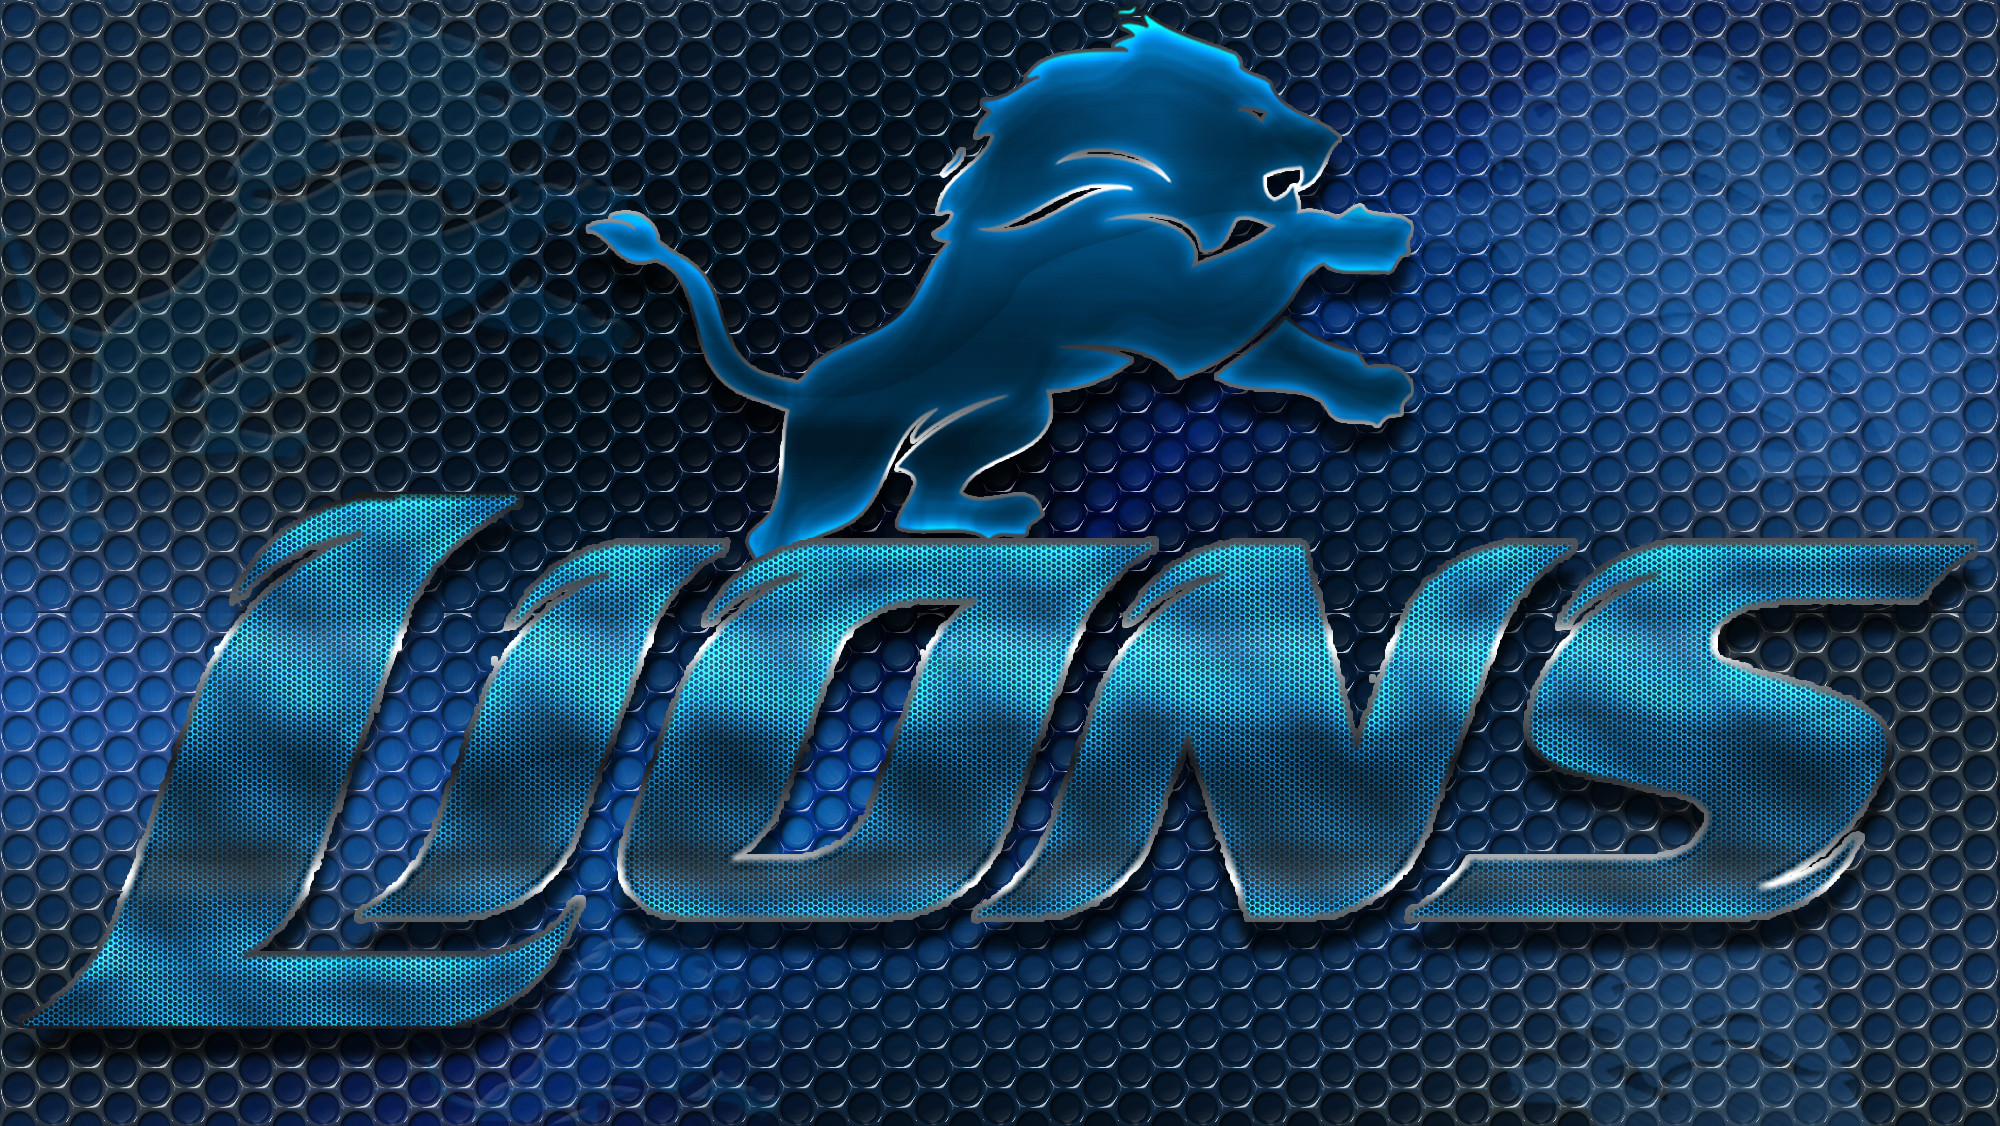 2000x1126 Download free detroit lions wallpapers for your mobile phone by | HD  Wallpapers | Pinterest | Detroit lions wallpaper